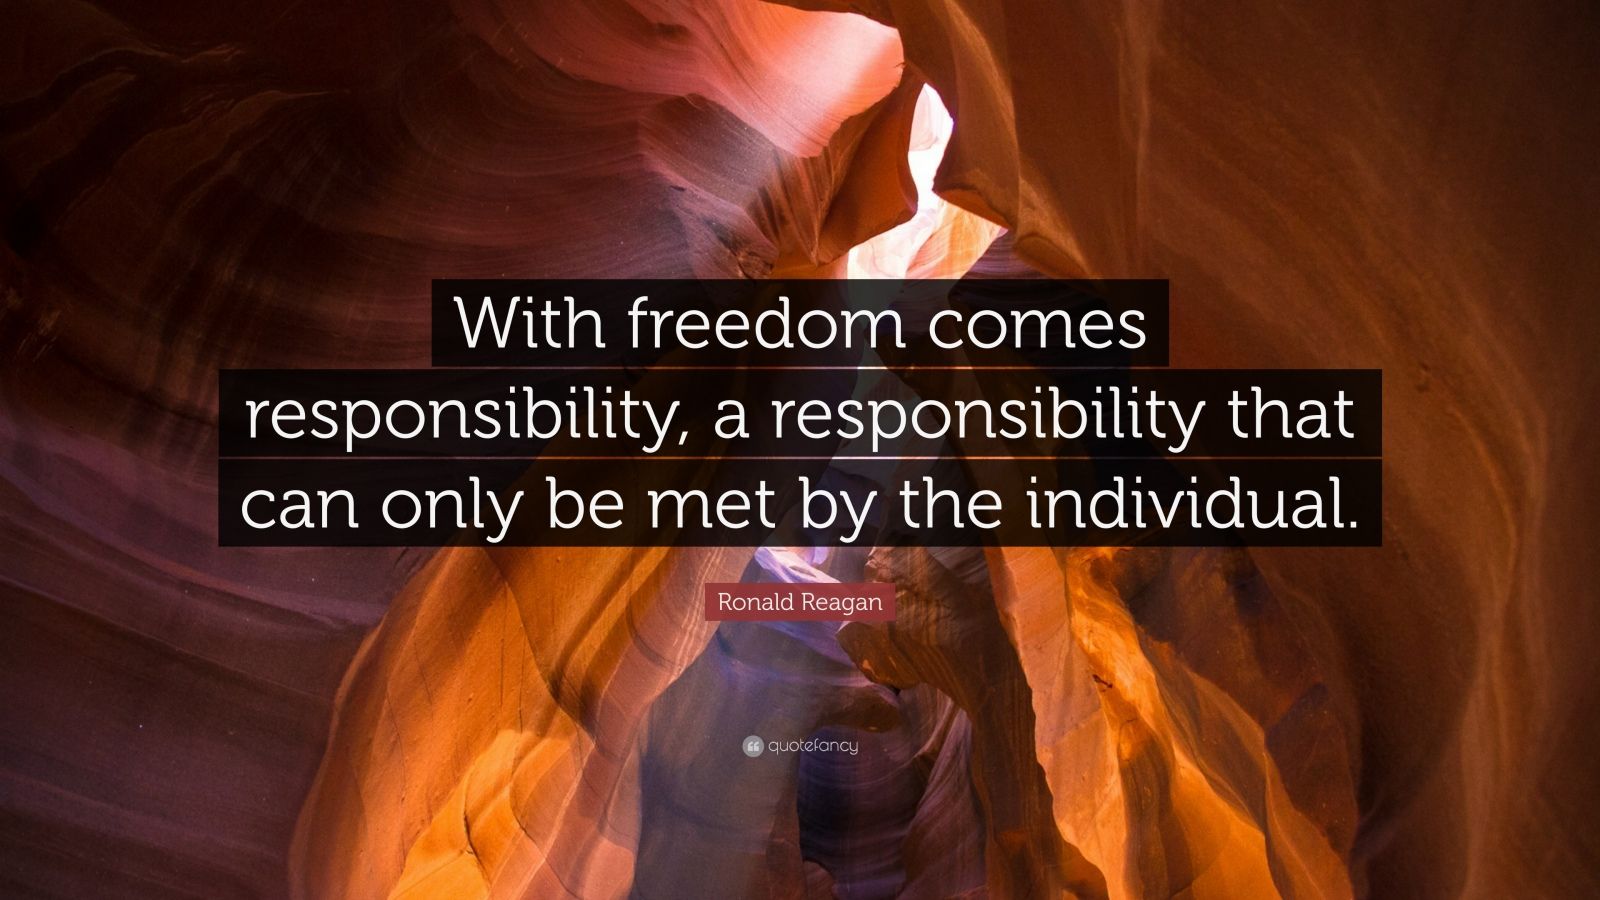 Ronald Reagan Quote “With freedom comes responsibility, a